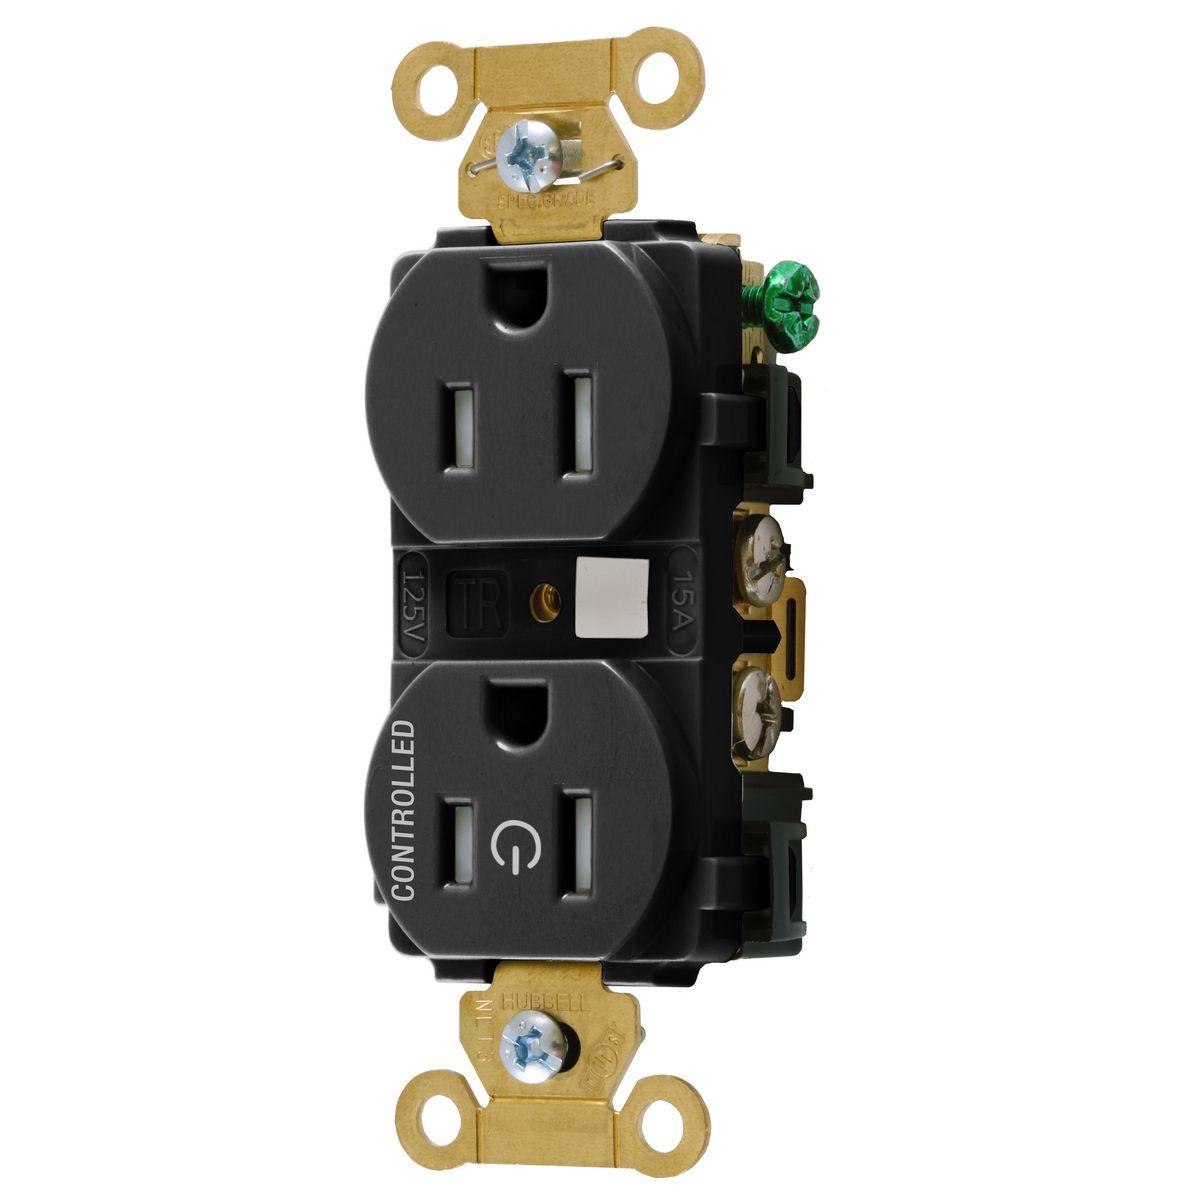 Hubbell HBL5262C1BLKTR Straight Blade Devices, Extra Heavy Duty Standard Duplex Receptacles for Controlled Applications ,Split Circuit, 15A, 125V, 2 Pole, 3 Wire Grounding,Black  ; Permanently marked with universal power symbol and the word "CONTROLLED" to visually identify rec